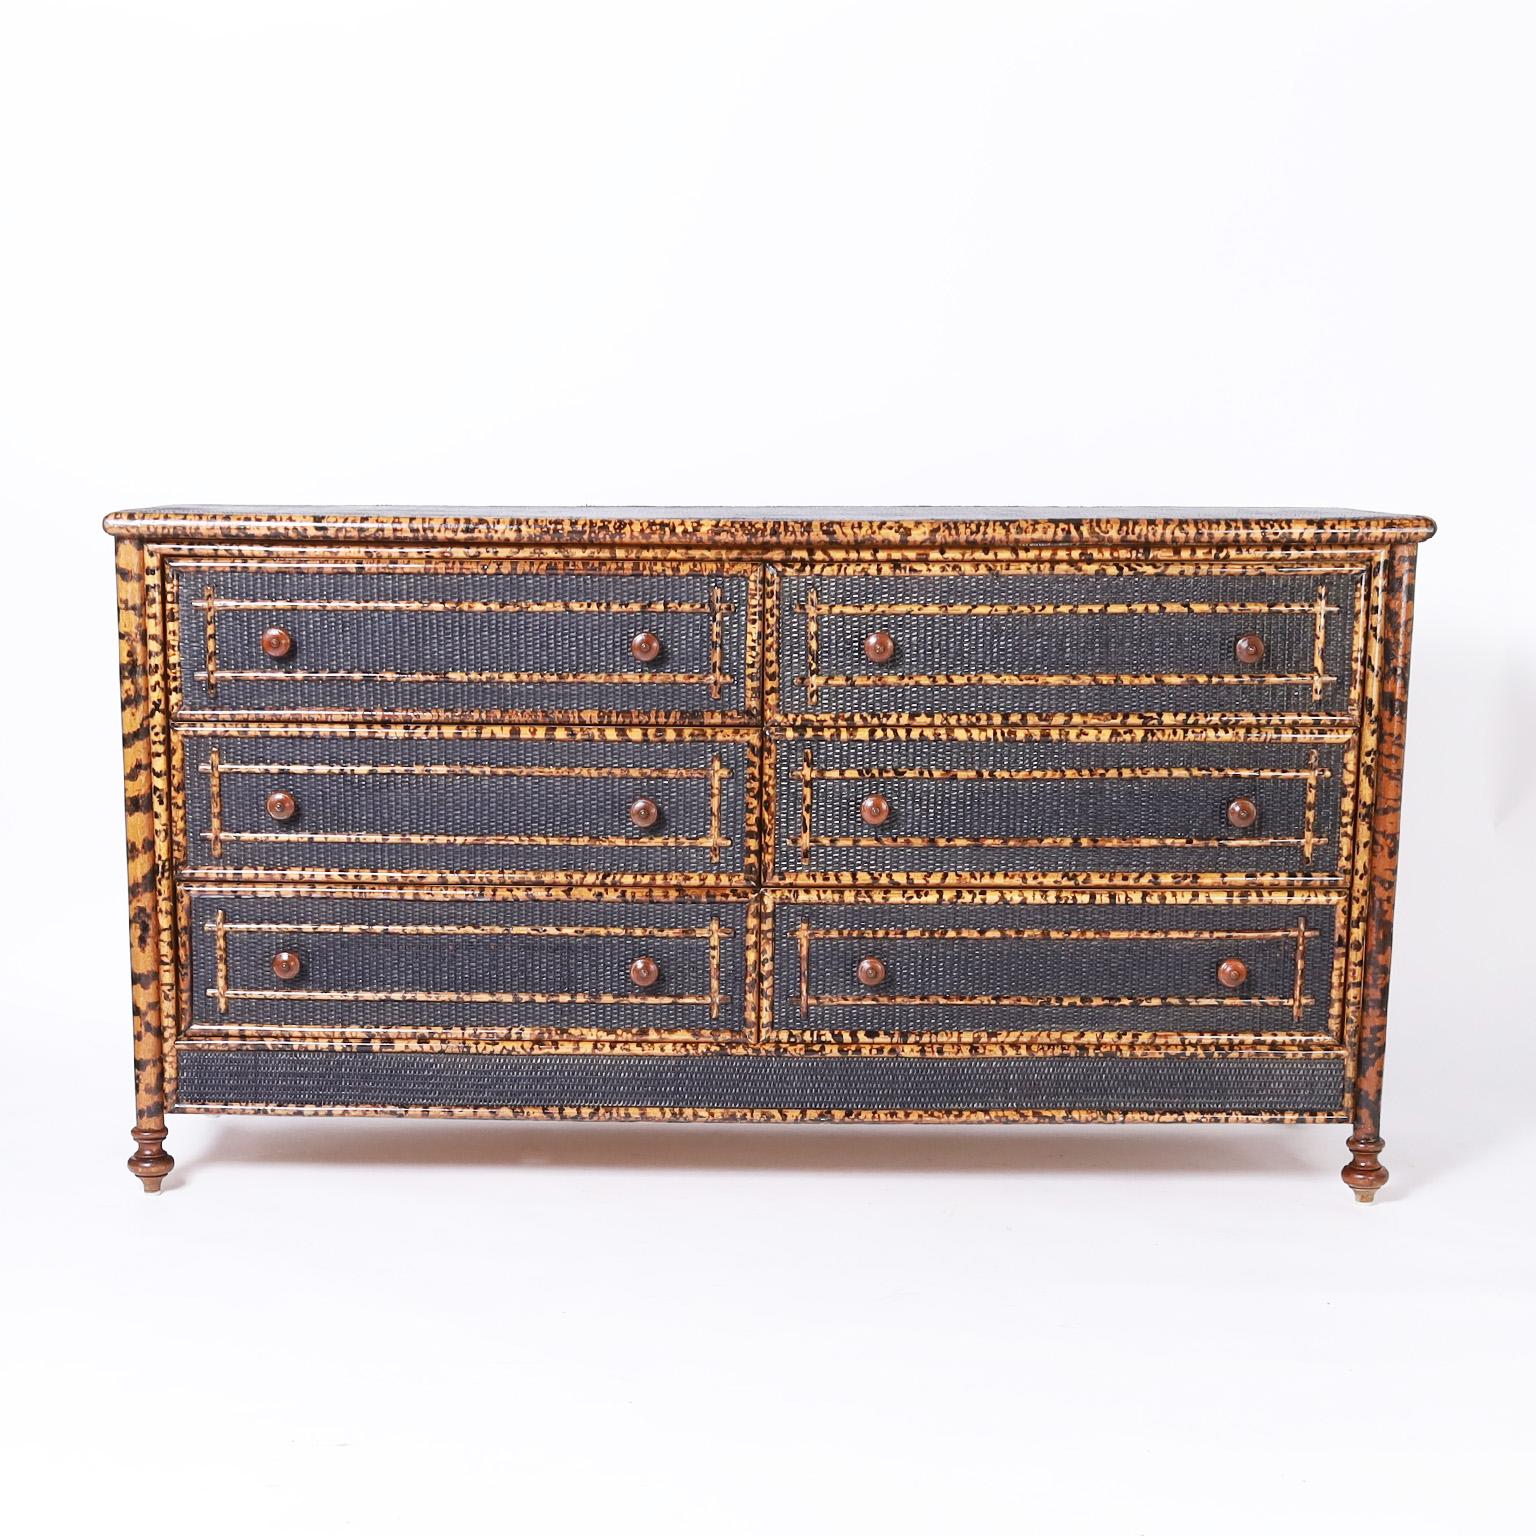 British Colonial style mid century chest of six drawers with a faux burnt bamboo frame, black painted grasscloth panels with applied bamboo designs and turned wood pulls and feet.